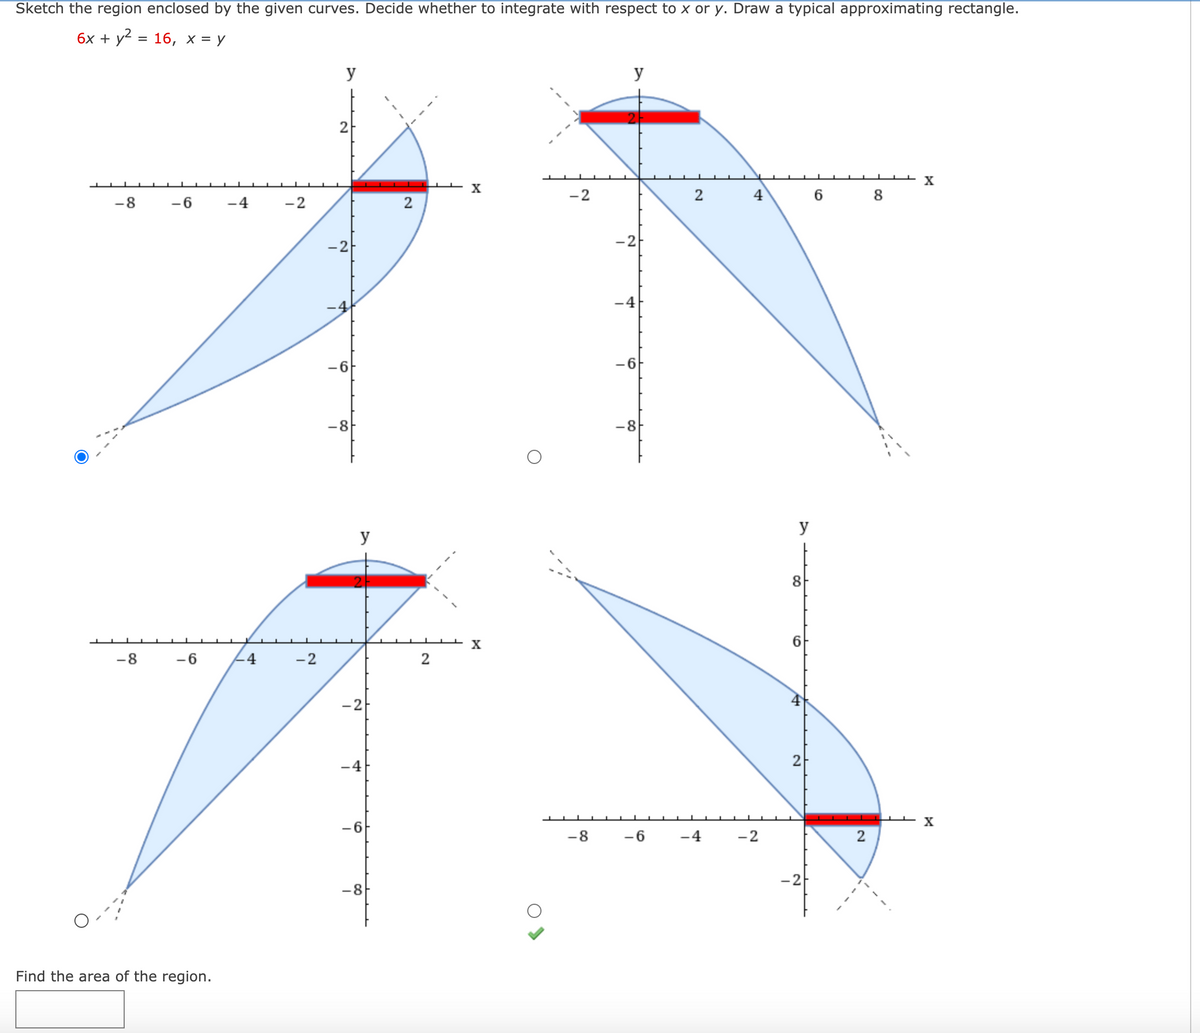 Sketch the region enclosed by the given curves. Decide whether to integrate with respect to x or y. Draw a typical approximating rectangle.
бх + y? %3D 16, х%3D у
y
y
2
-2
2 4
6 8
-8
- 6
-4
-2
2
-2
-2
-4
-6
-6
-8
-8
y
y
8.
6.
-8
-6
4
-2
-2
2
-4
X
-6
-8
- 6
-4
-2
2
-2
-8
Find the area of the region.
CO
2.
